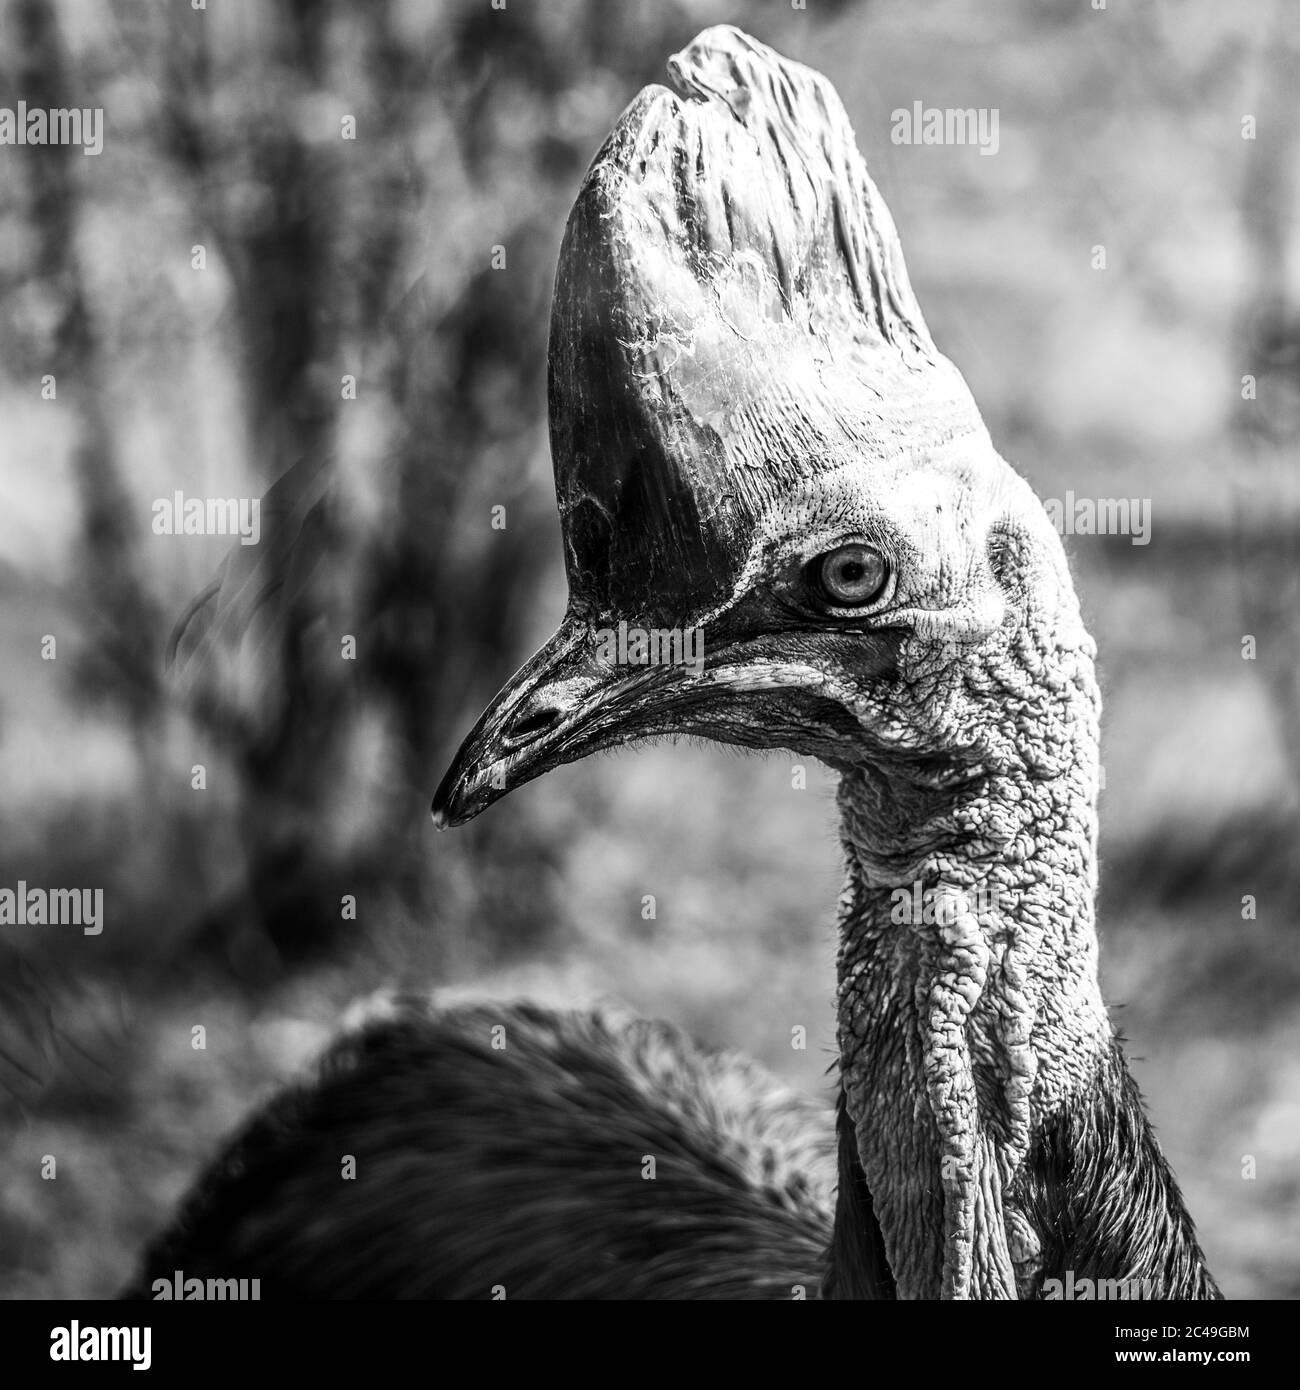 Southern cassowary, Casuarius casuarius, ratite bird close-up view. Native to Papua New Guinea, Indonesia and Australia tropical forests. Black and white image. Stock Photo